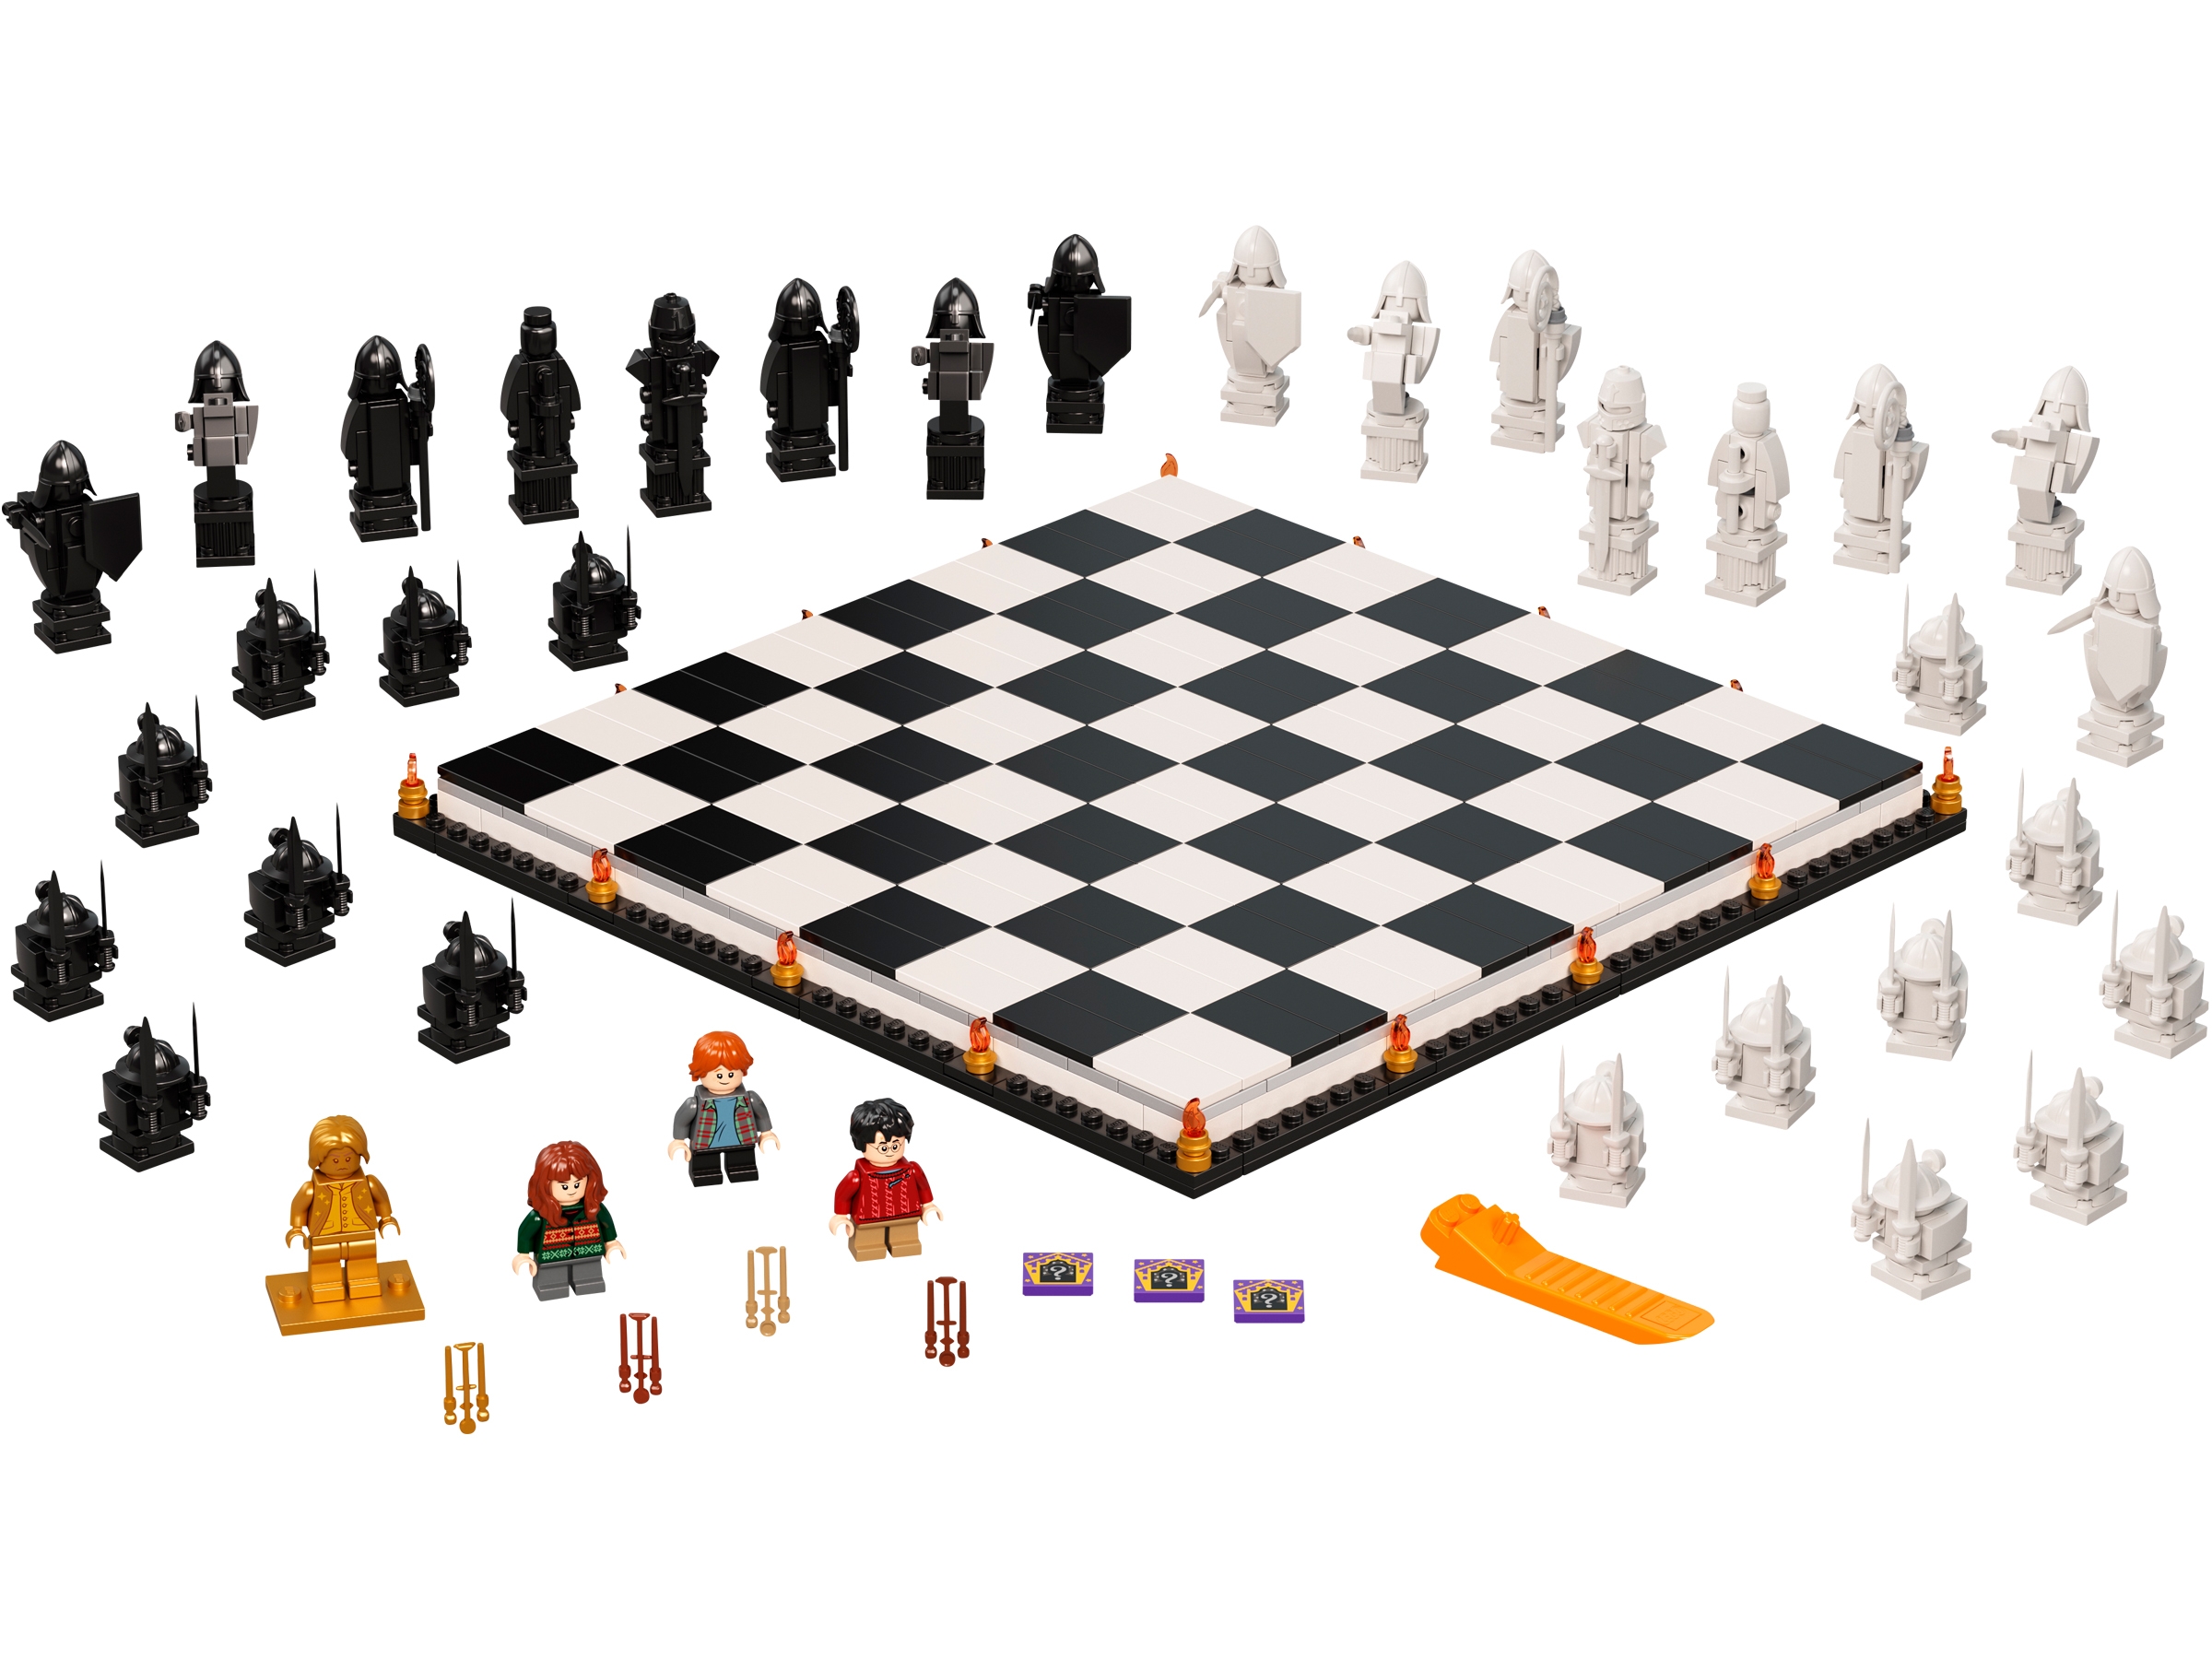 Learn How to Play Chess Book & Chess Set - Mini Chess Board